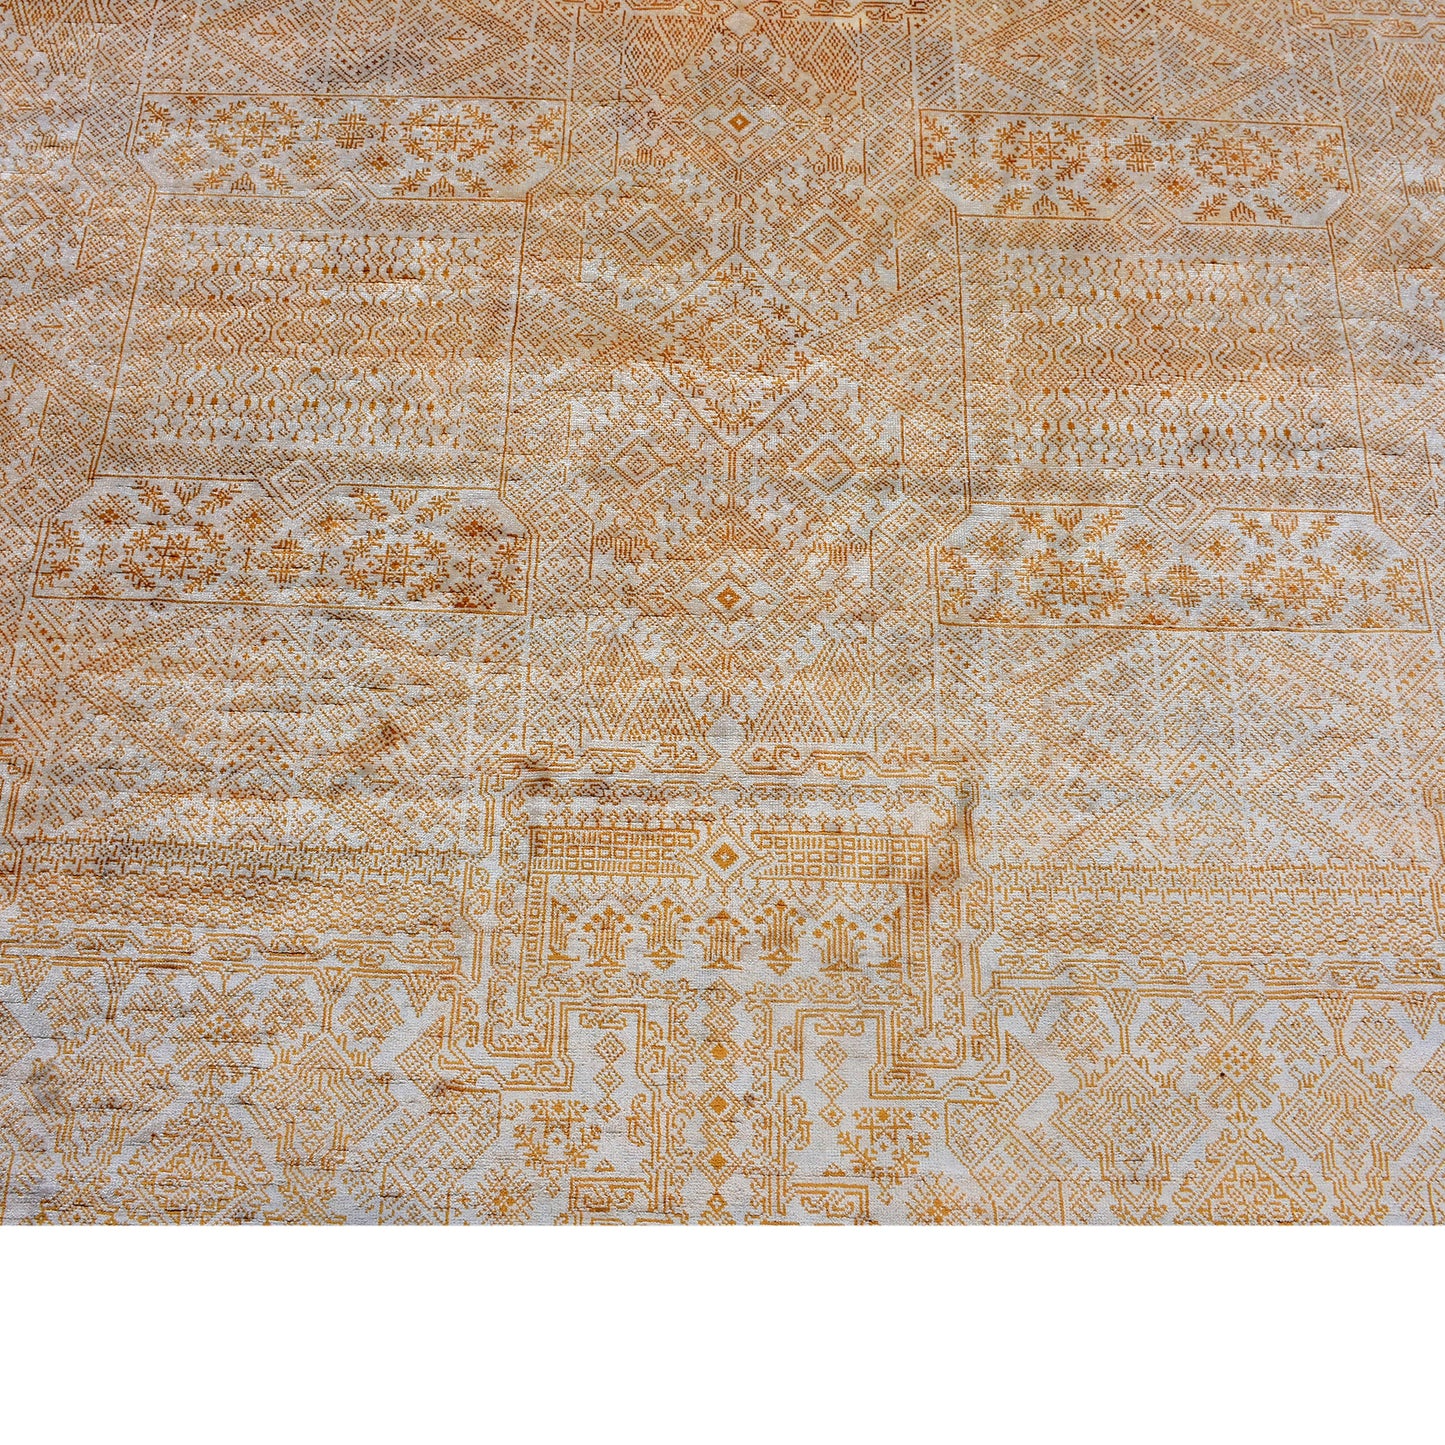 Get trendy with Camel Beige Pure Silk Traditional Handknotted Area Rug 8.0x10.5ft 244x314Cms - Traditional Rugs available at Jaipur Oriental Rugs. Grab yours for $5835.00 today!